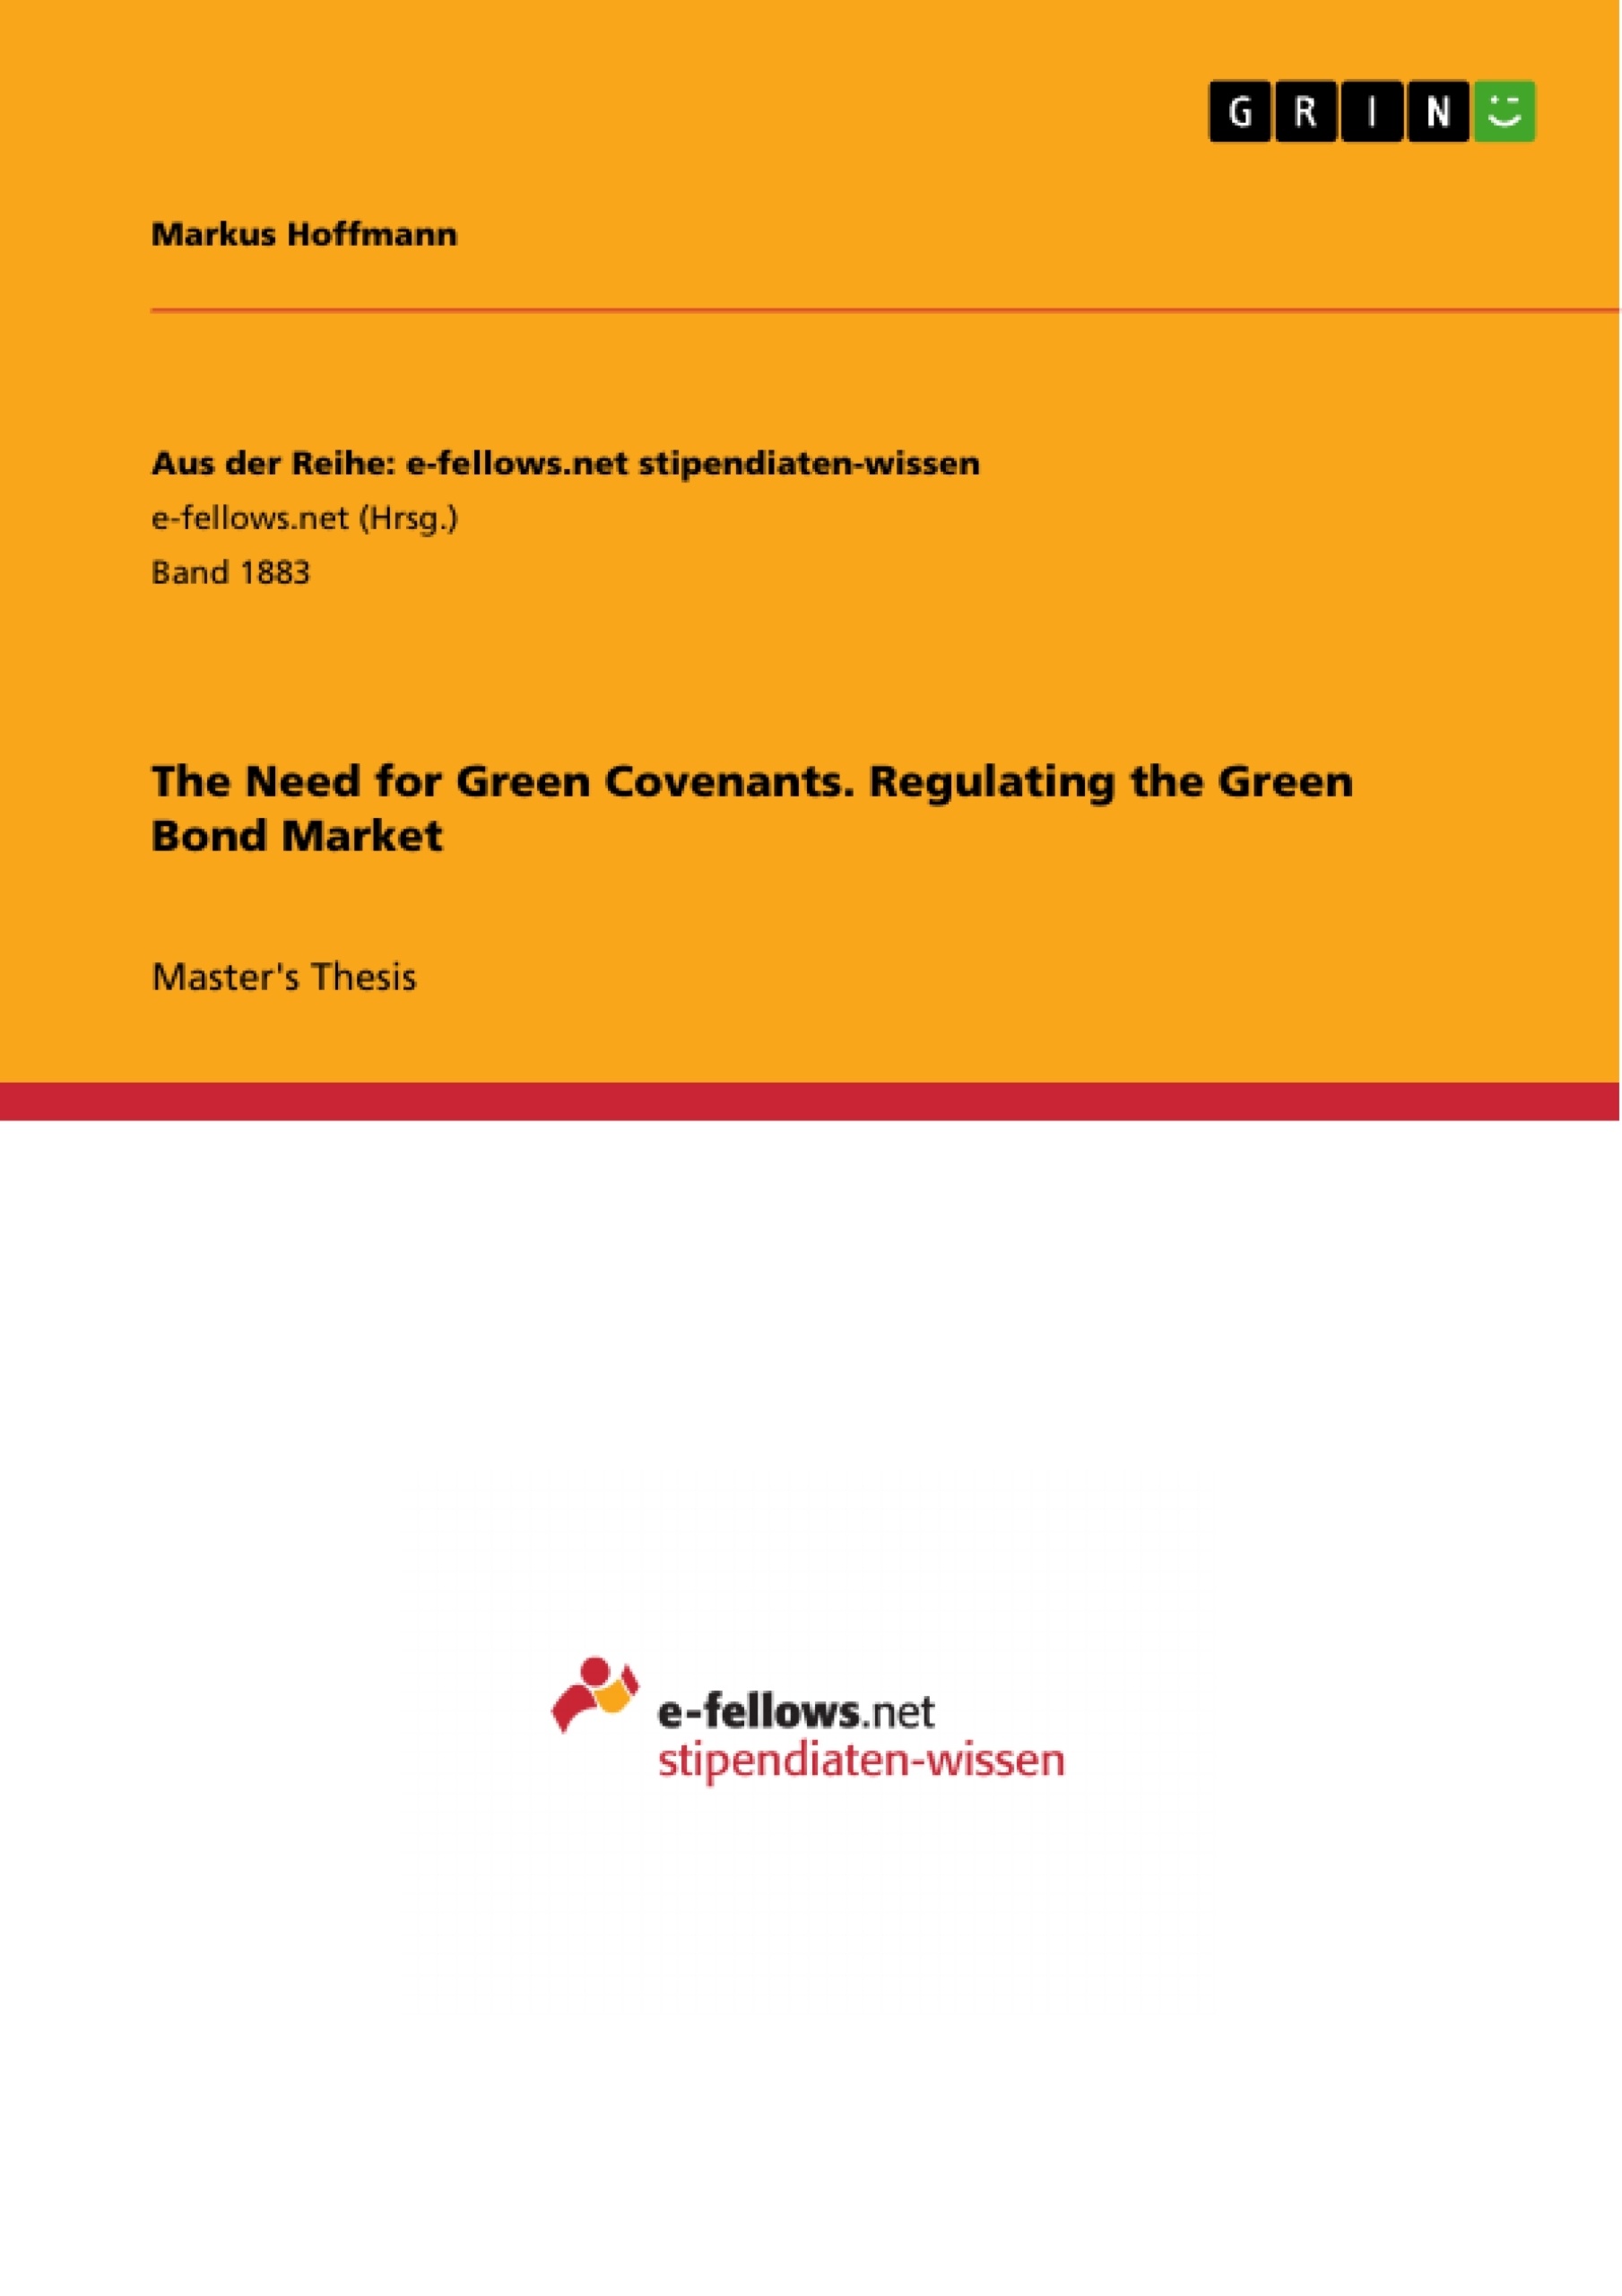 Title: The Need for Green Covenants. Regulating the Green Bond Market